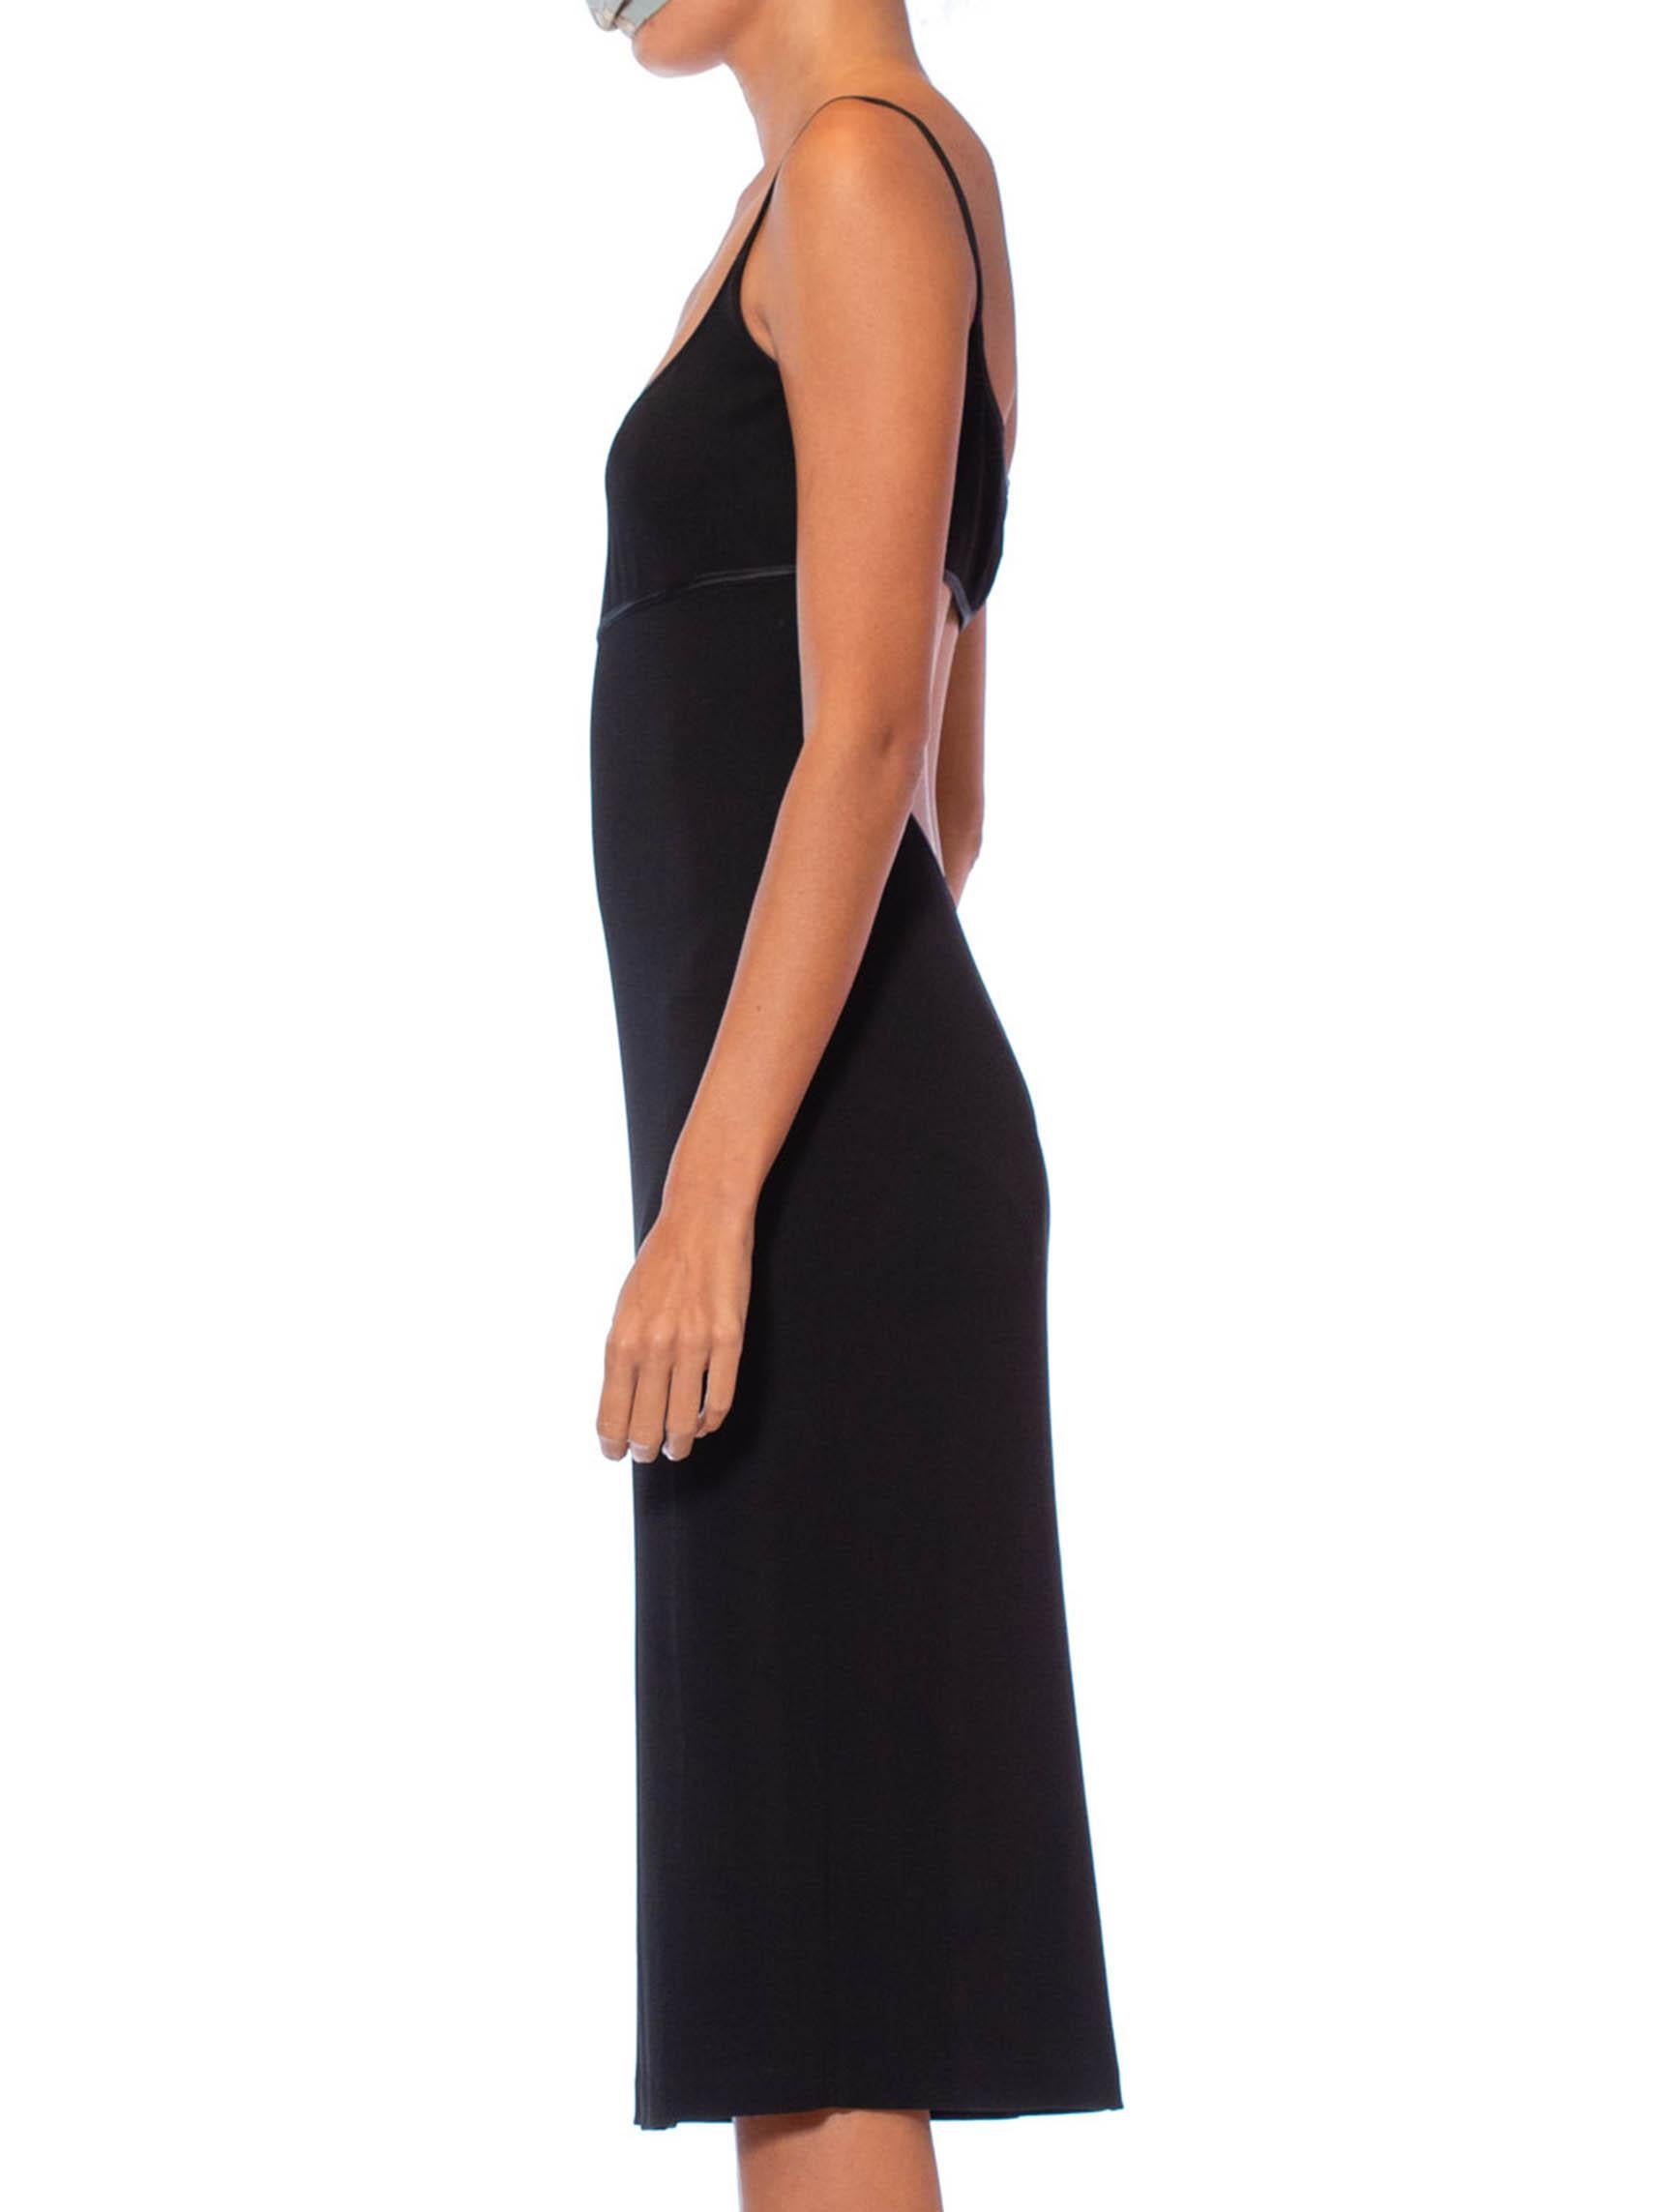 Women's 1990S RICHARD TYLER Black Rayon Jersey Open Back Body-Con Cocktail Dress With S